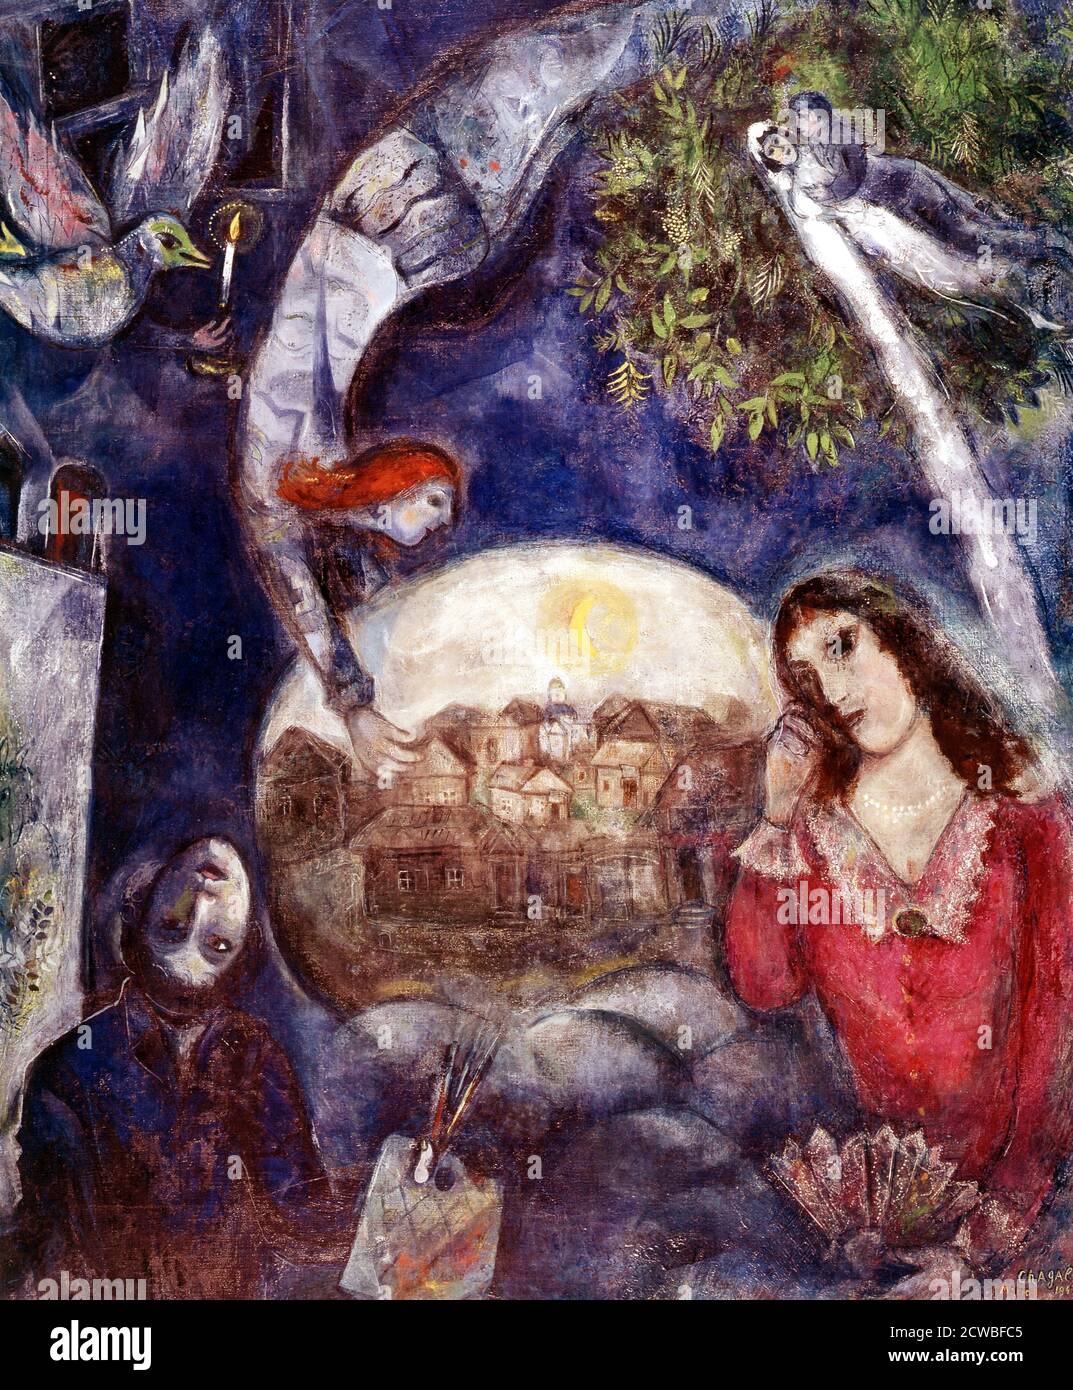 An Undying Love: 'Around Her'; 1945, by Marc Chagall (1887 - 1985); Russian-French artist of Belarusian Jewish artist. Bella Rosenfeld met Marc Chagall in the summer of 1909 on a visit to St. Petersburg. Marc was an aspiring artist, in the throes of creating his now famous oeuvre. Bella, the daughter of a successful jeweller, was in the midst of her studies and acquiring a taste for writing. Their meeting was the beginning of an artist-muse relationship that would inspire some of Chagall's best work. Stock Photo